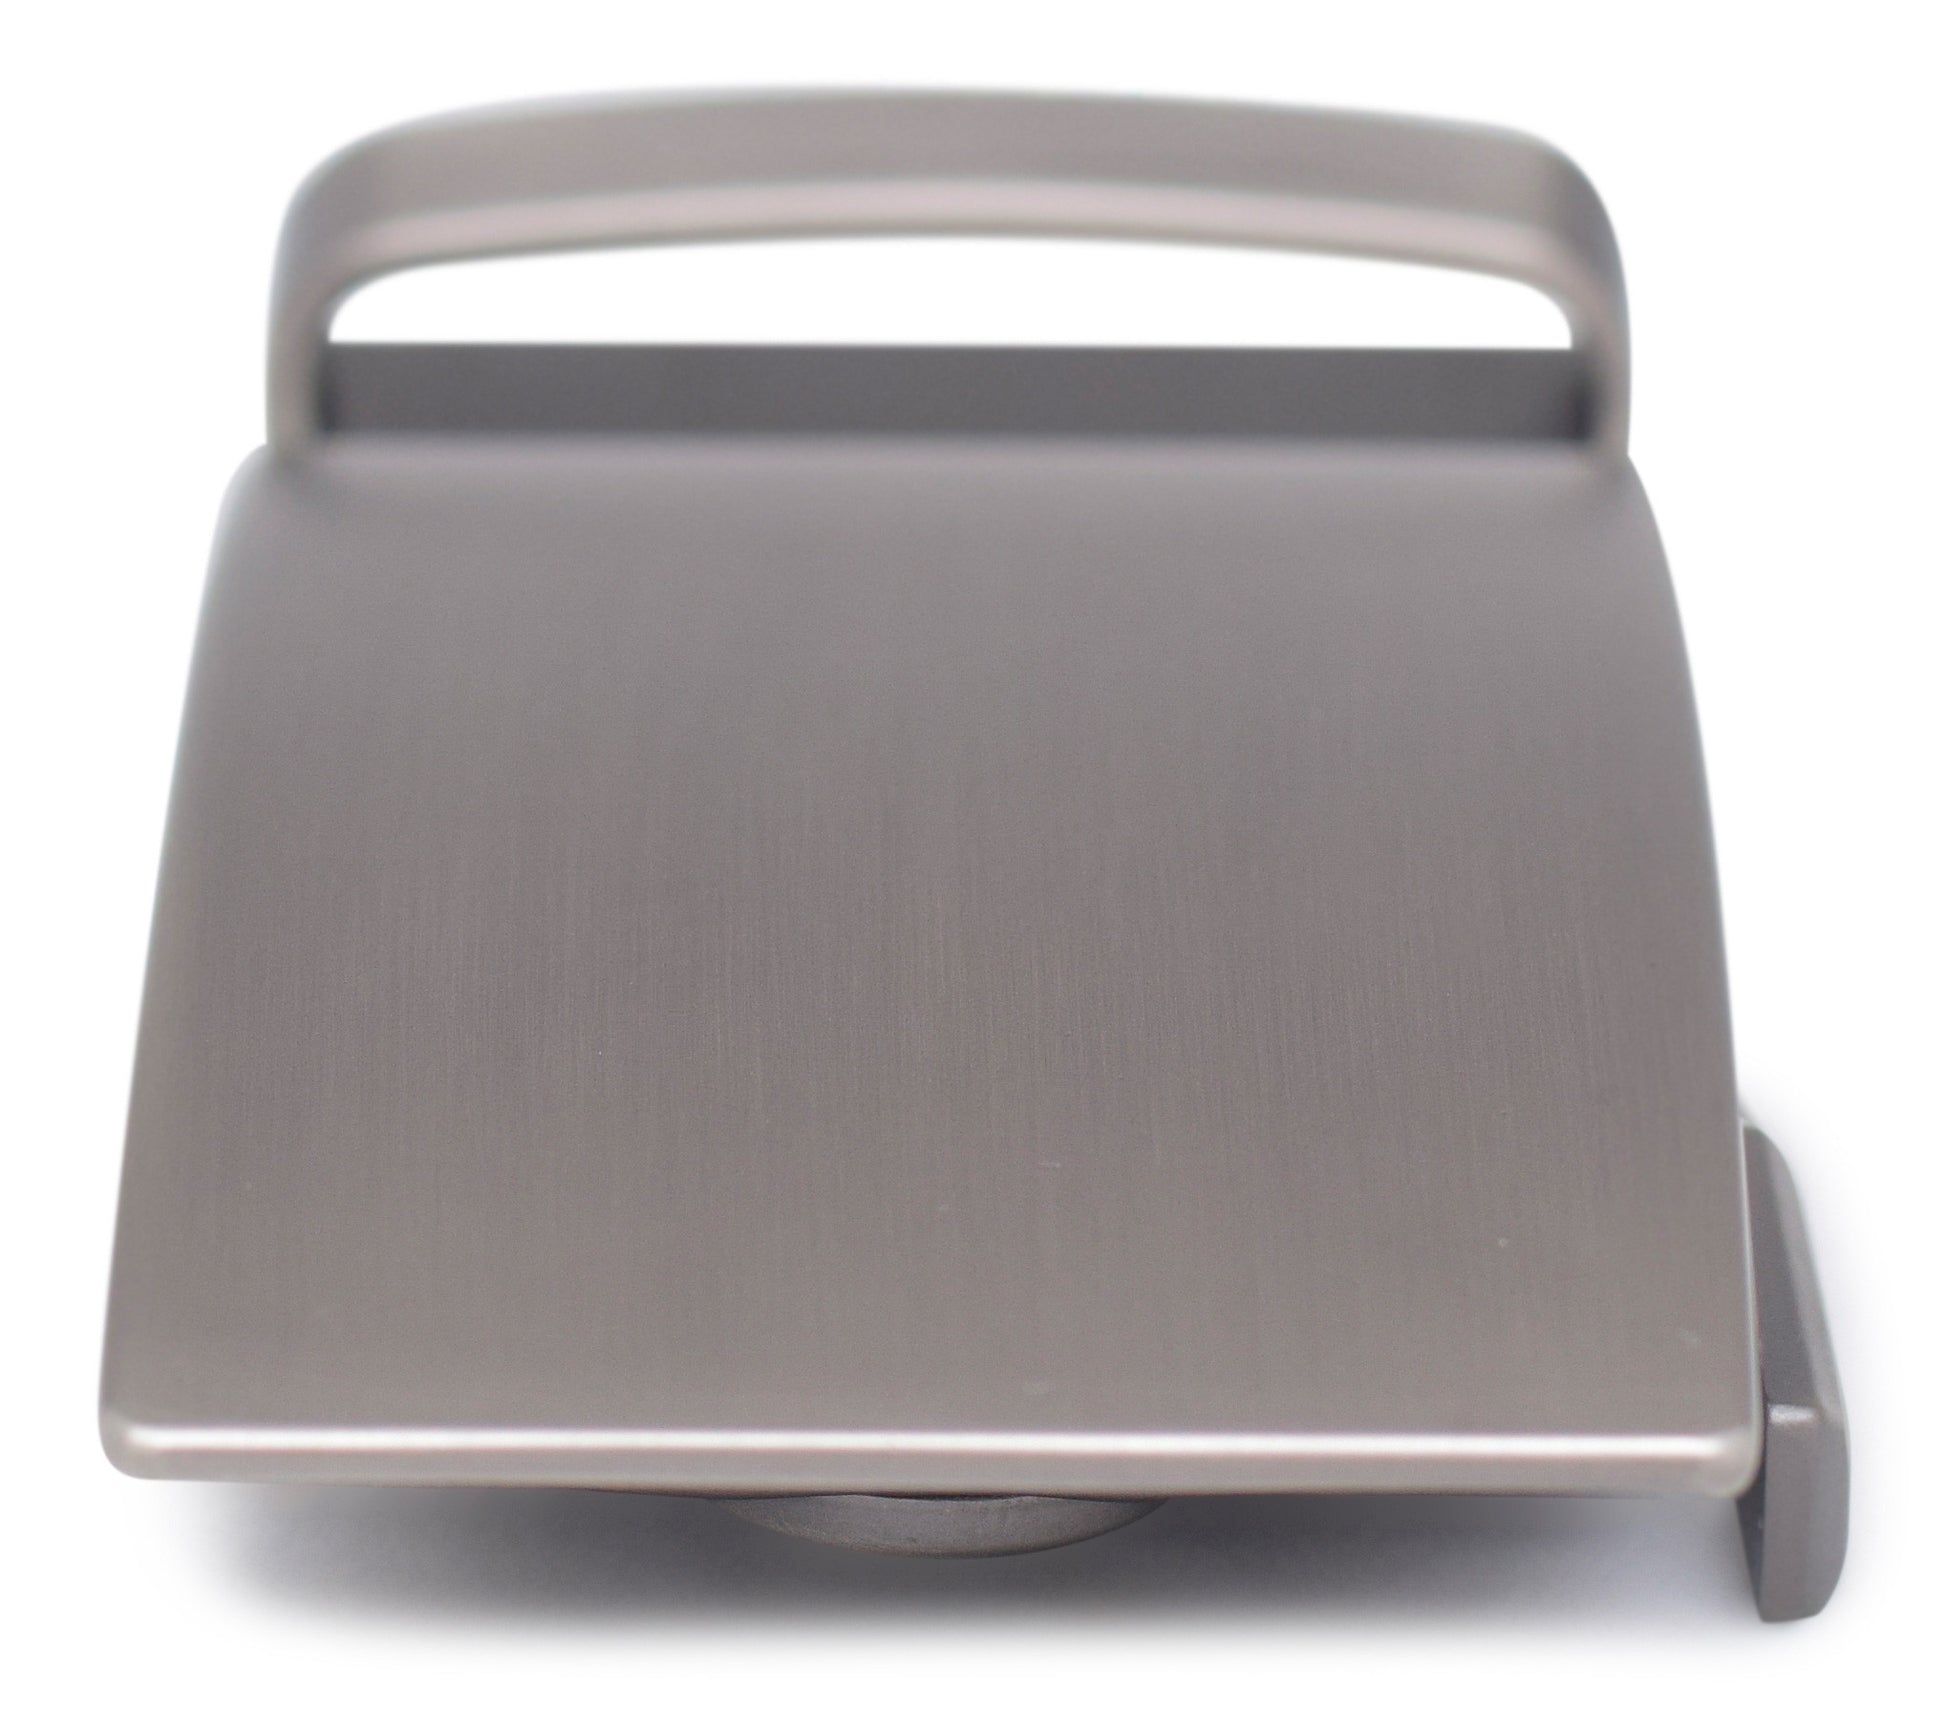 Men's classic ratchet belt buckle in gunmetal with a width of 1.5 inches, close up front view.